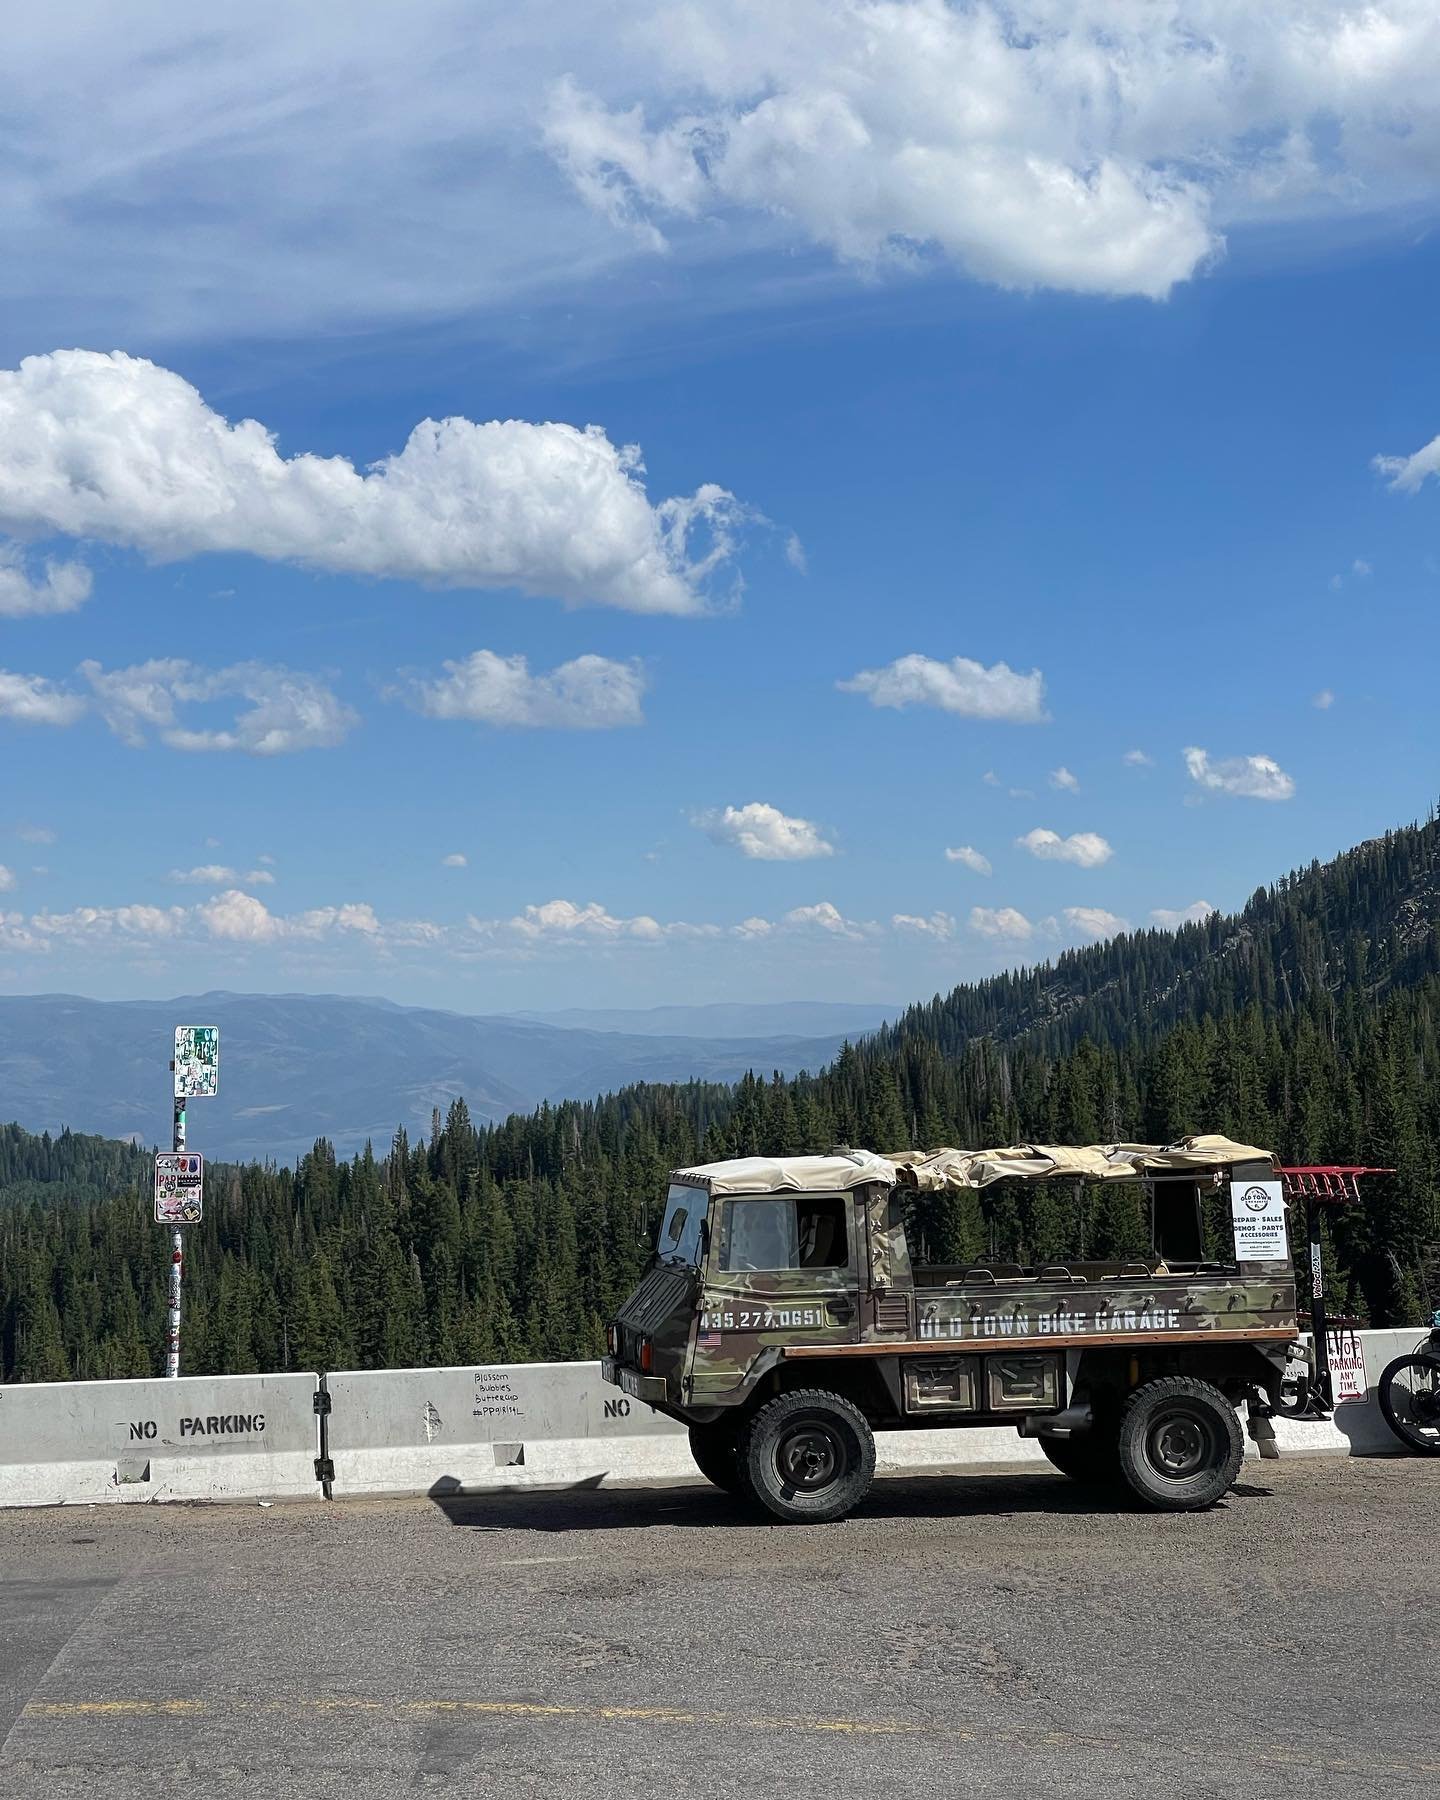 Did you know that we also can run shuttles? $20/rider with a three person minimum and you can get a lift up in the Pinzgauer to the location of your choosing! Get where the chairlift can&rsquo;t reach in a cool ride 😎 #stayshredding #pinzgauer #pinz